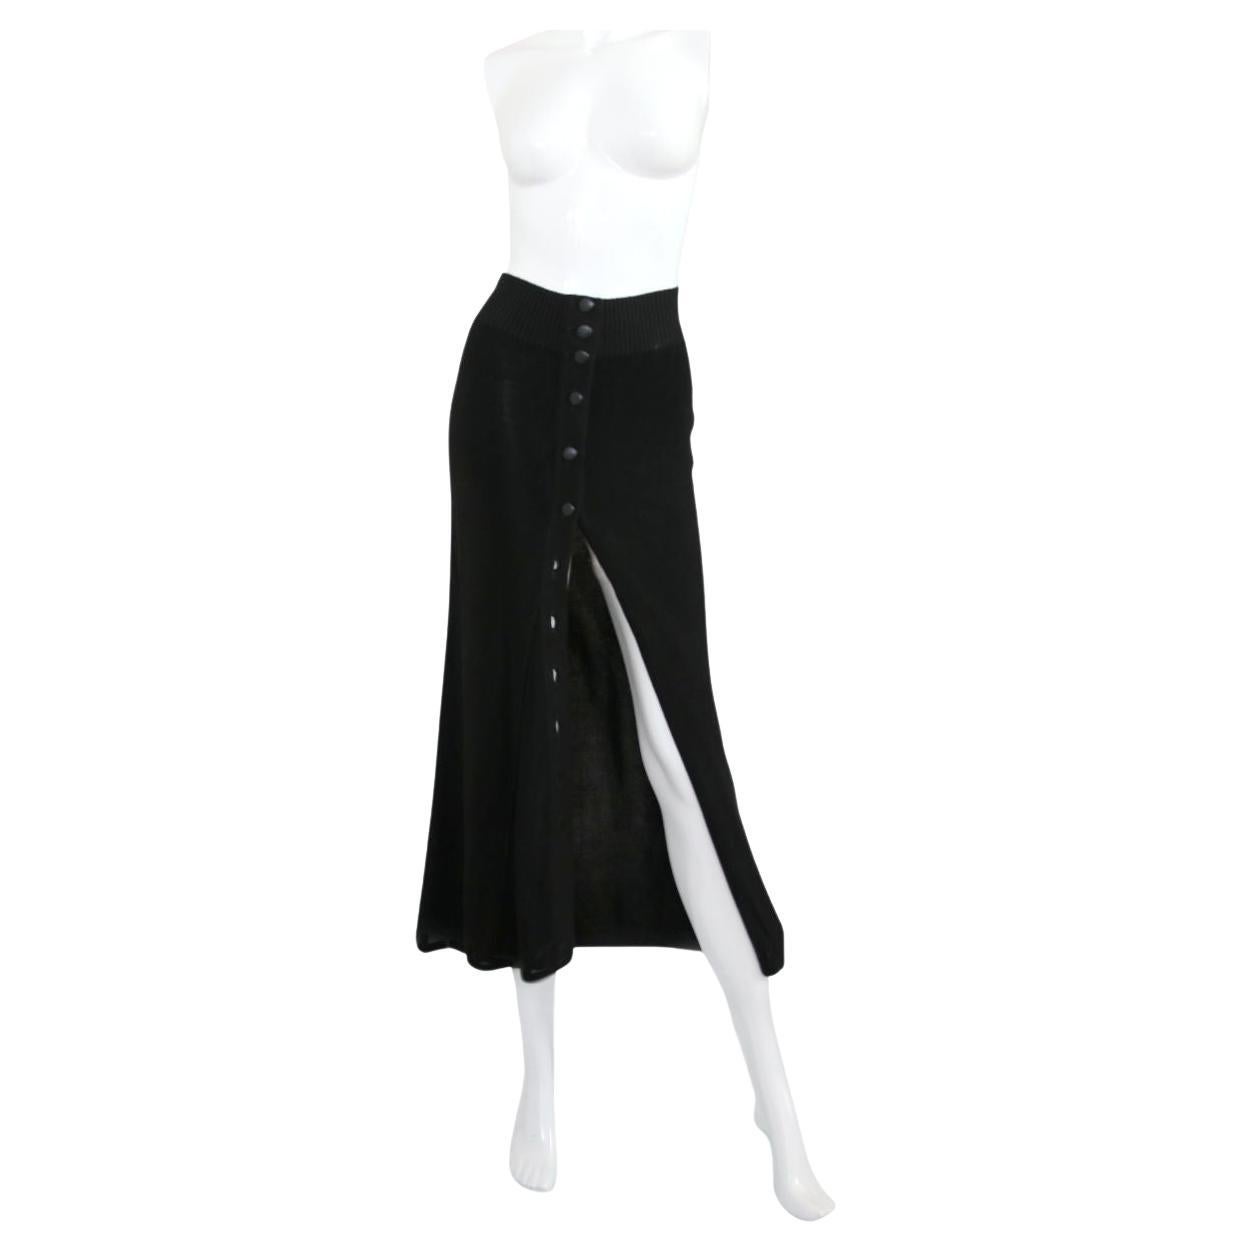 CHANEL 1996 Black Long Skirt with CC Logo Buttons by Karl Lagerfeld